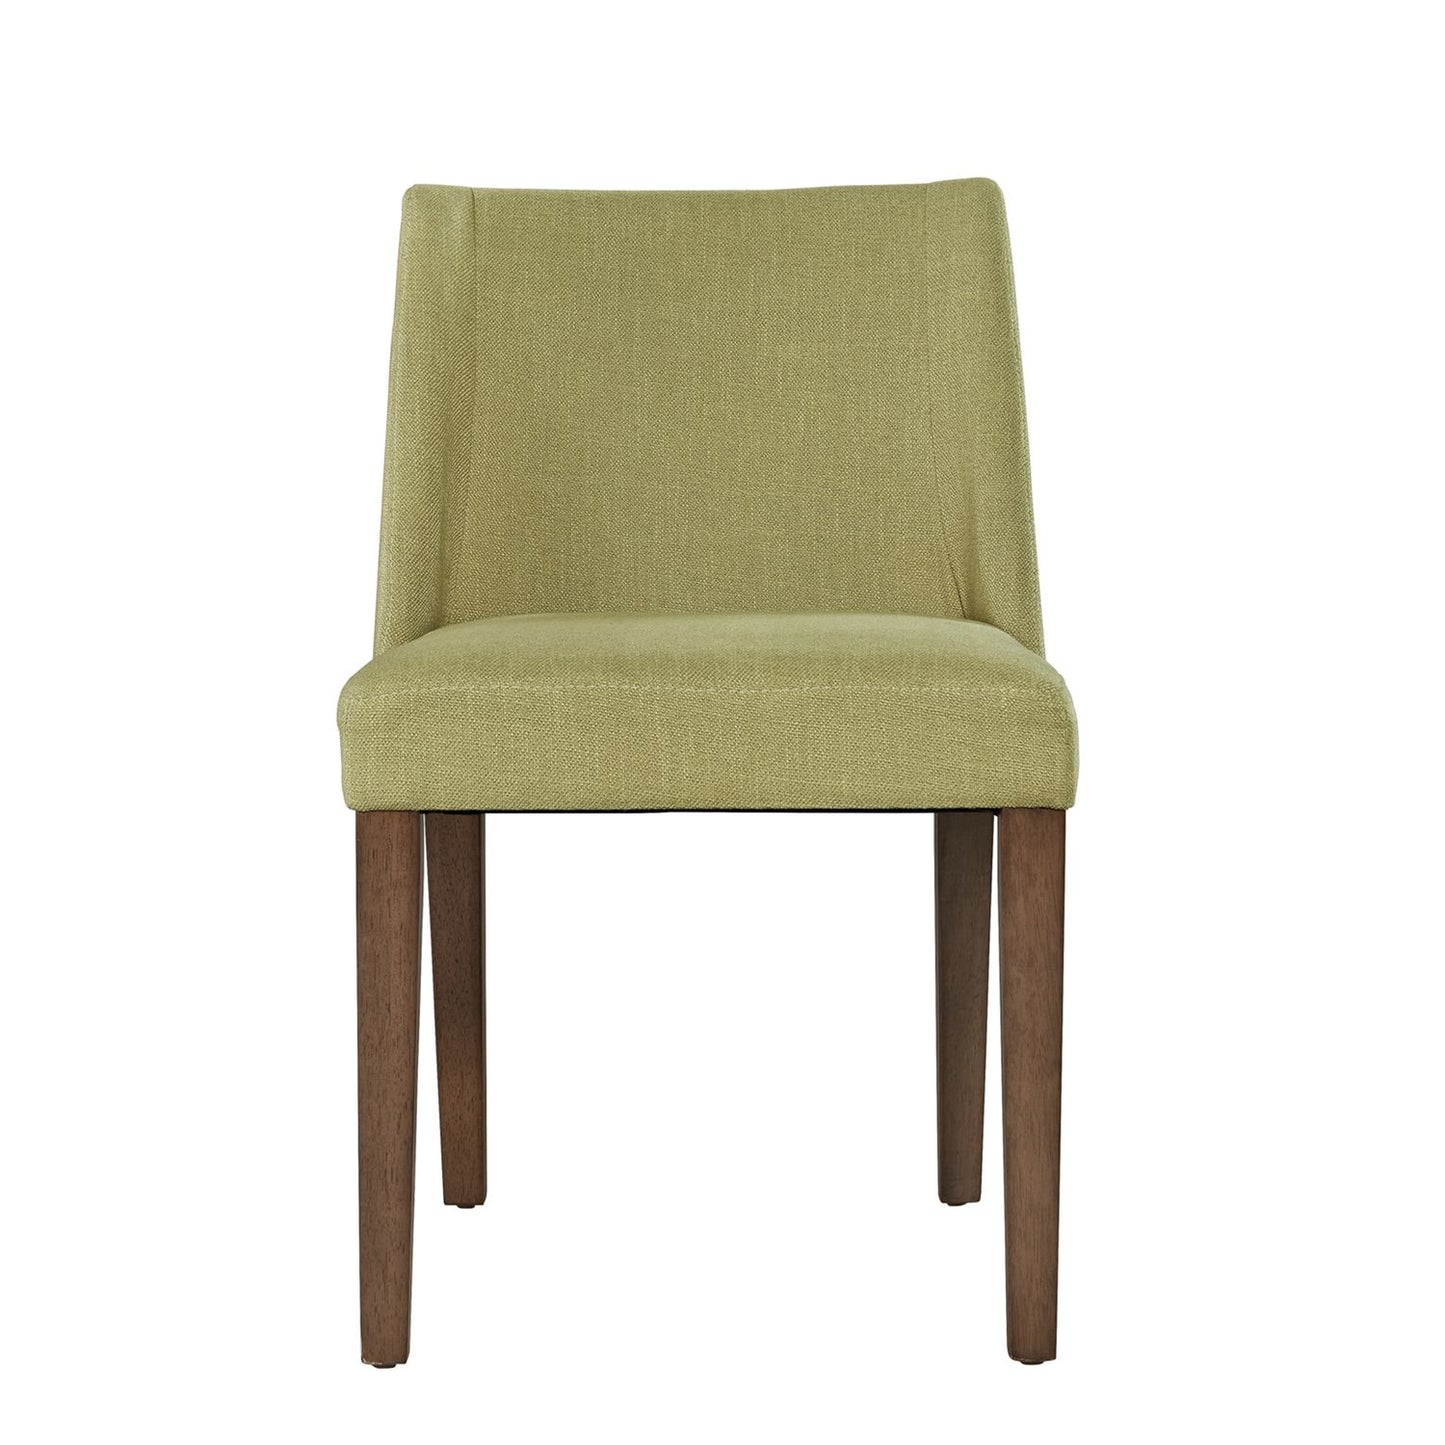 Space Savers Group Nido Dining Or Accent Chair Green